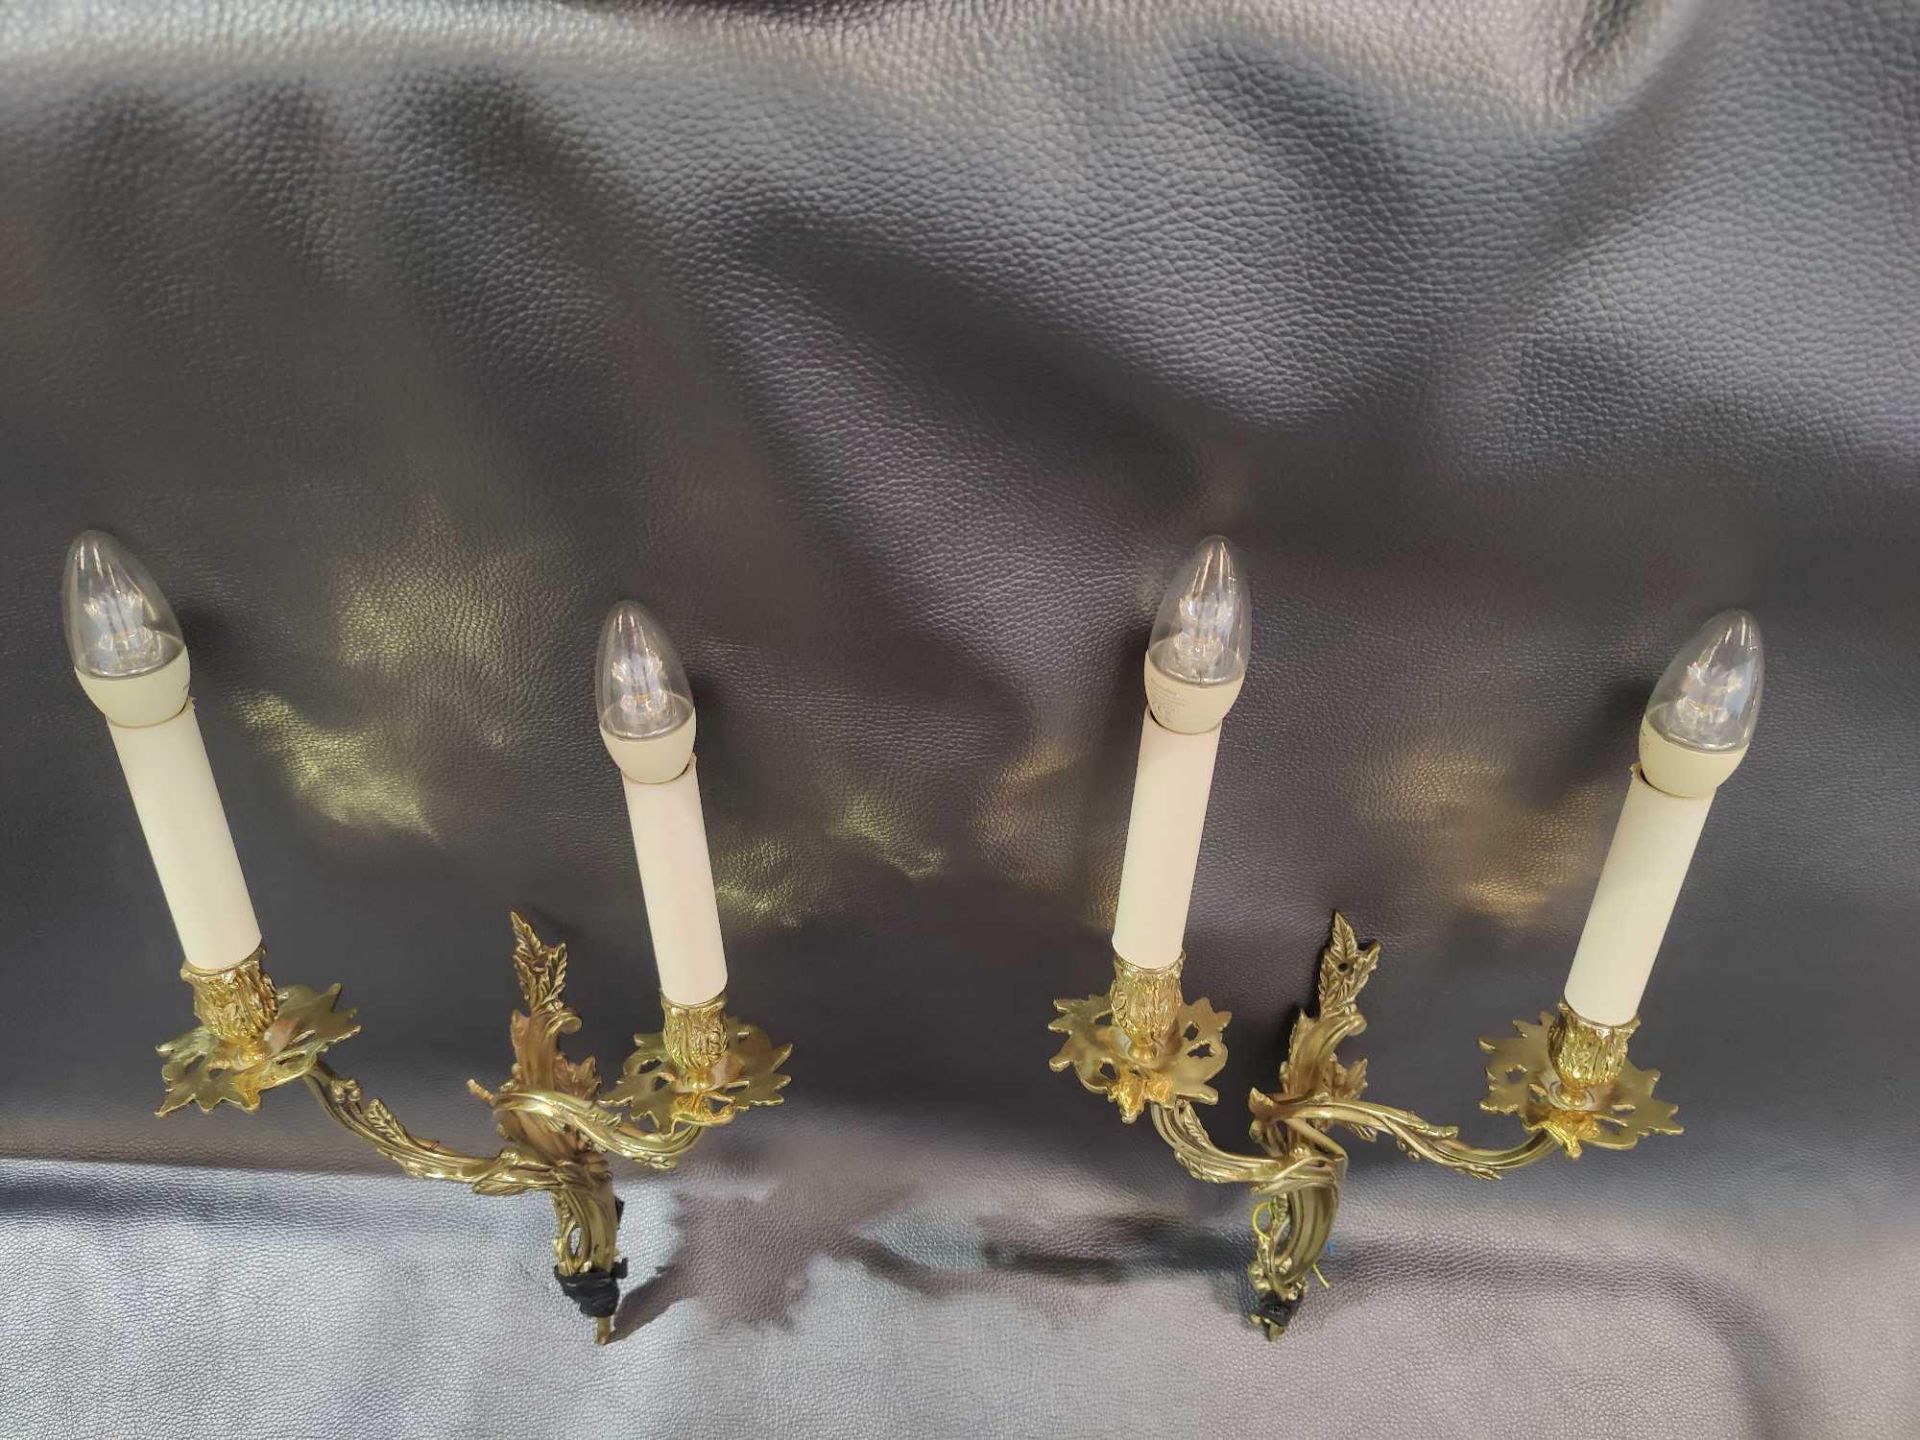 A Pair Of Rococo Style Wall Appliques In Gilt Bronze With Two Candles Agrafe Decor On Which Are - Image 3 of 3